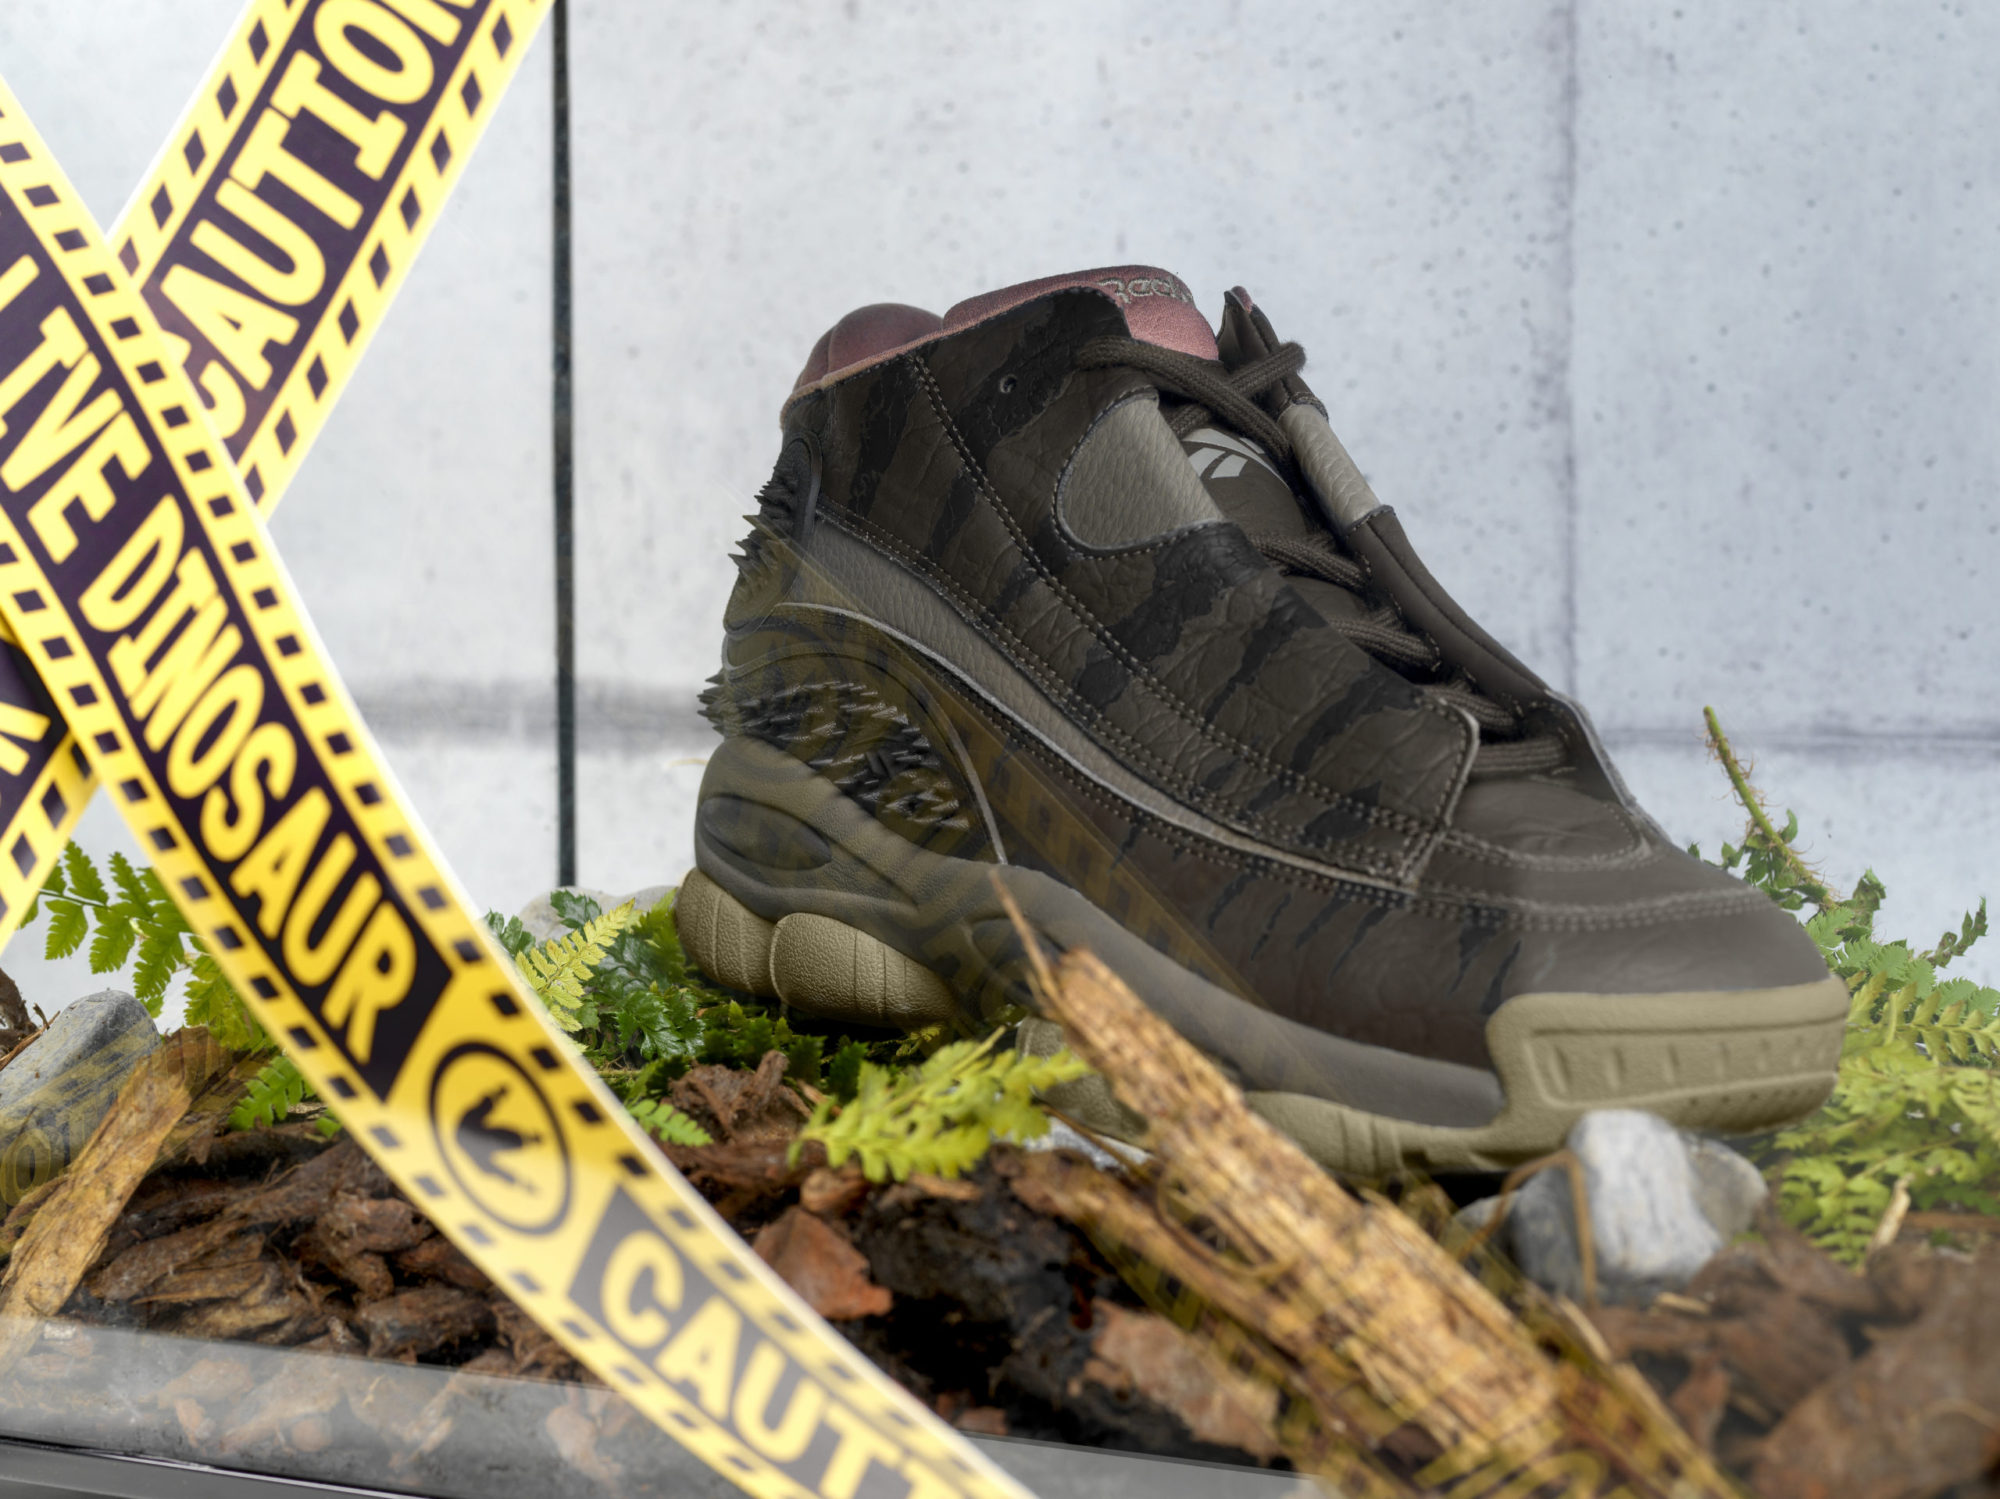 Reebok & Jurassic World Join Forces for Dino Sneaker Collection